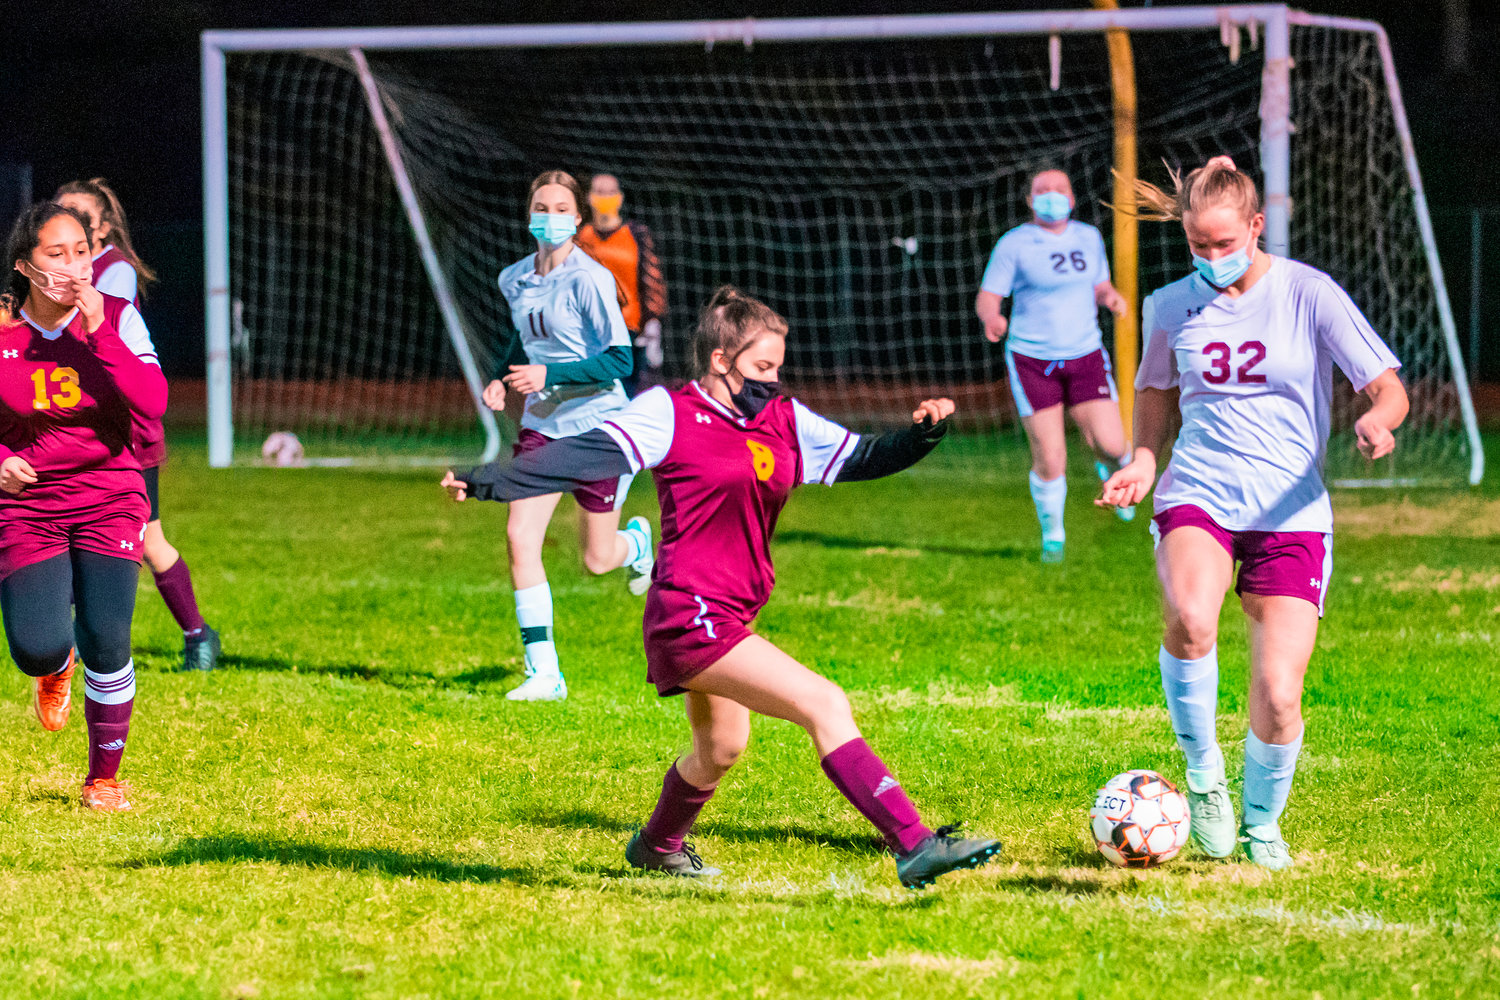 Cardinals’ Gabrielle Salgado (8) attempts to gain possession  during a game Wednesday night in Winlock.